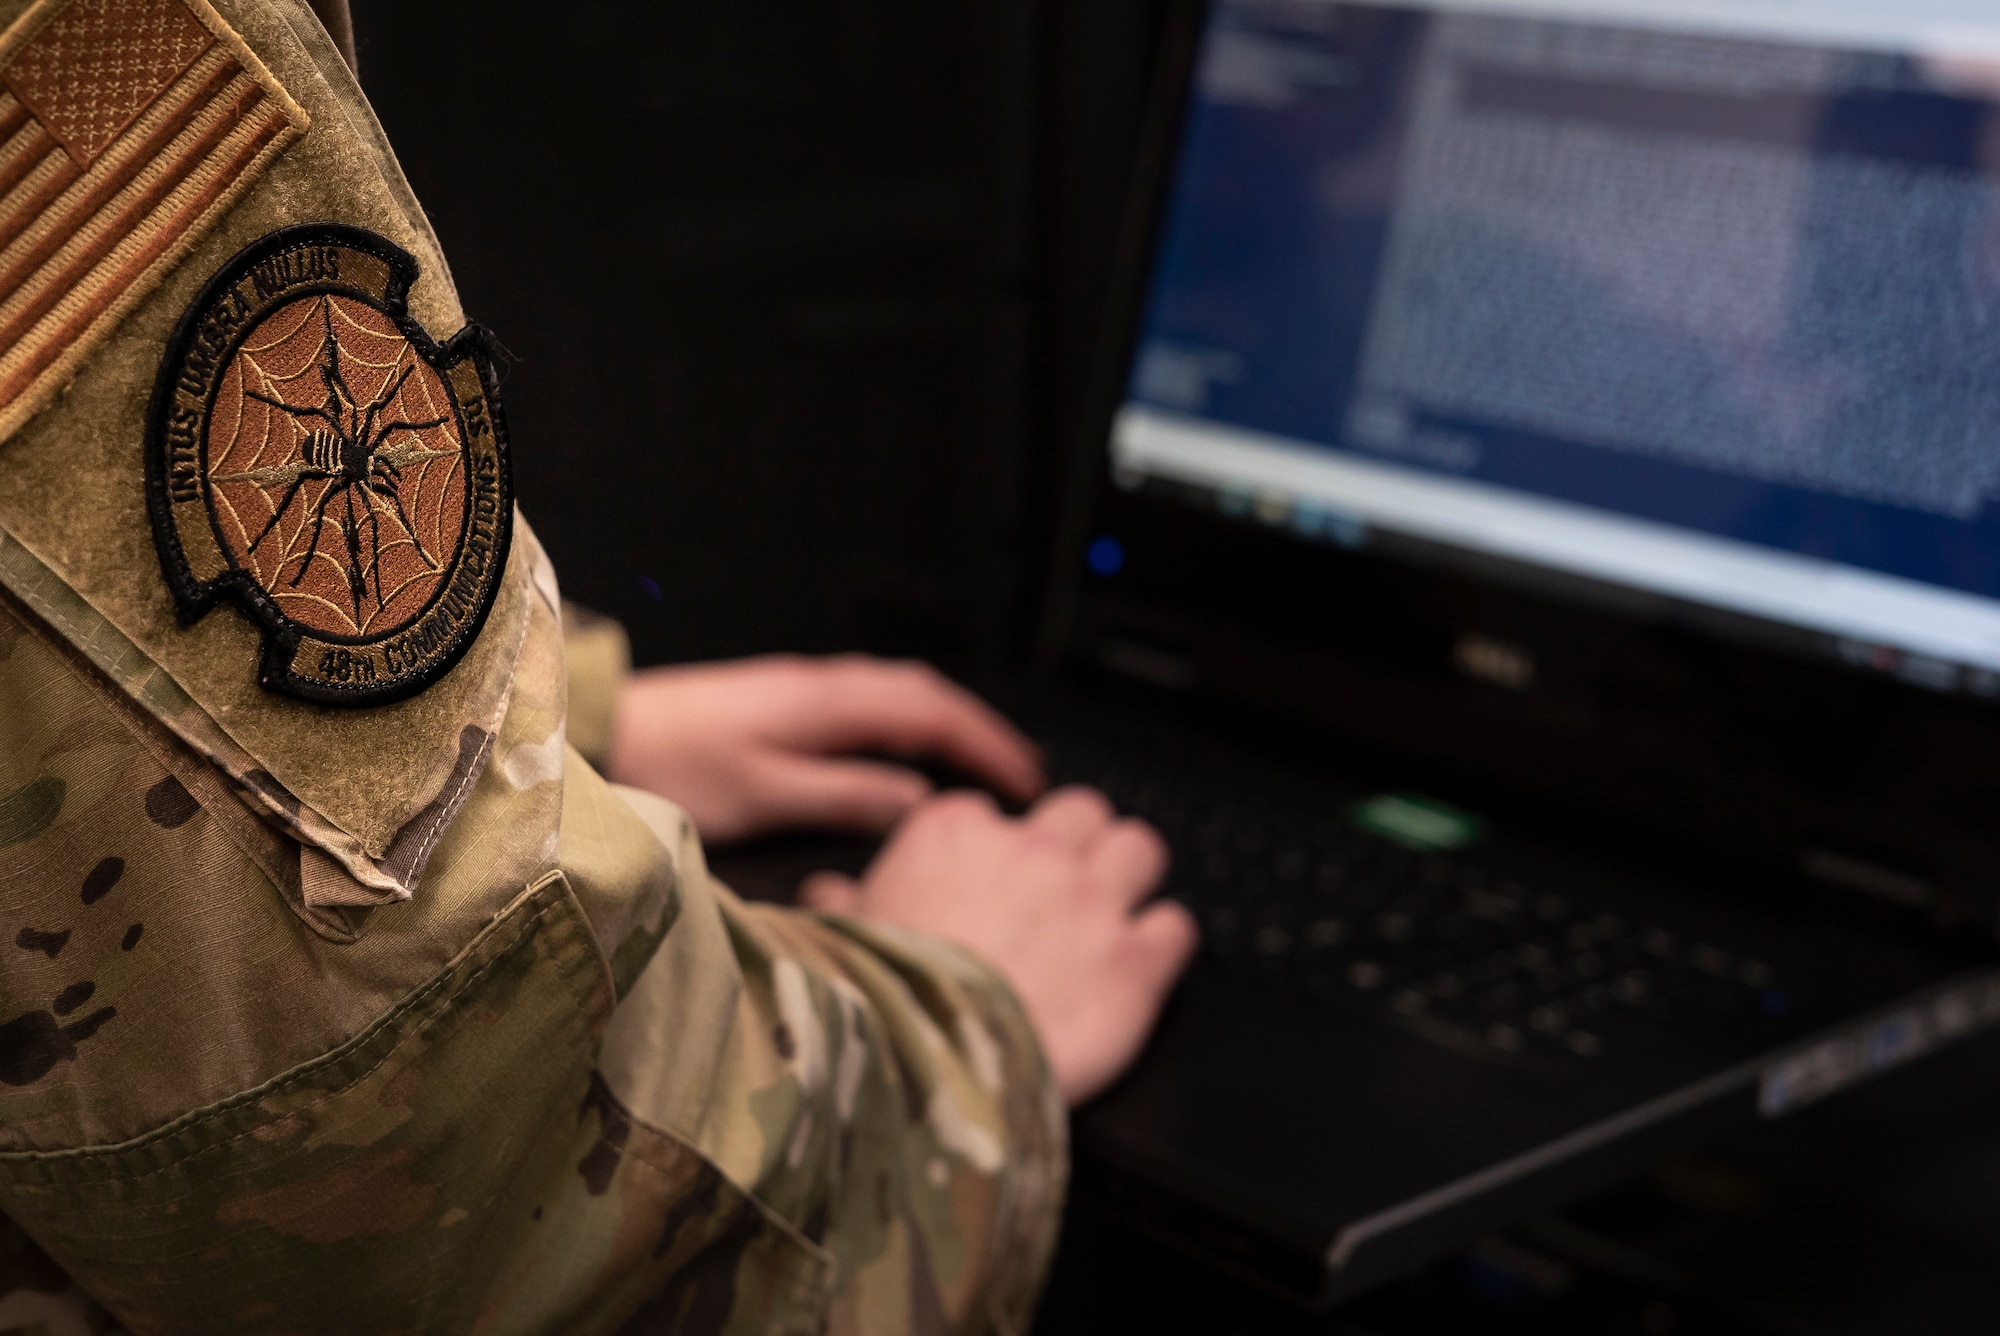 An Airman assigned to the 48th Communications Squadron works in the server room at Royal Air Force Lakenheath, England, May 25, 2021. The 48th CS is responsible for the maintenance and care of millions of dollars worth of communications assets providing superior computer, data and voice capabilities to Royal Air Force Lakenheath and RAF Feltwell. (U.S. Air Force photo by Senior Airman Jessi Monte)